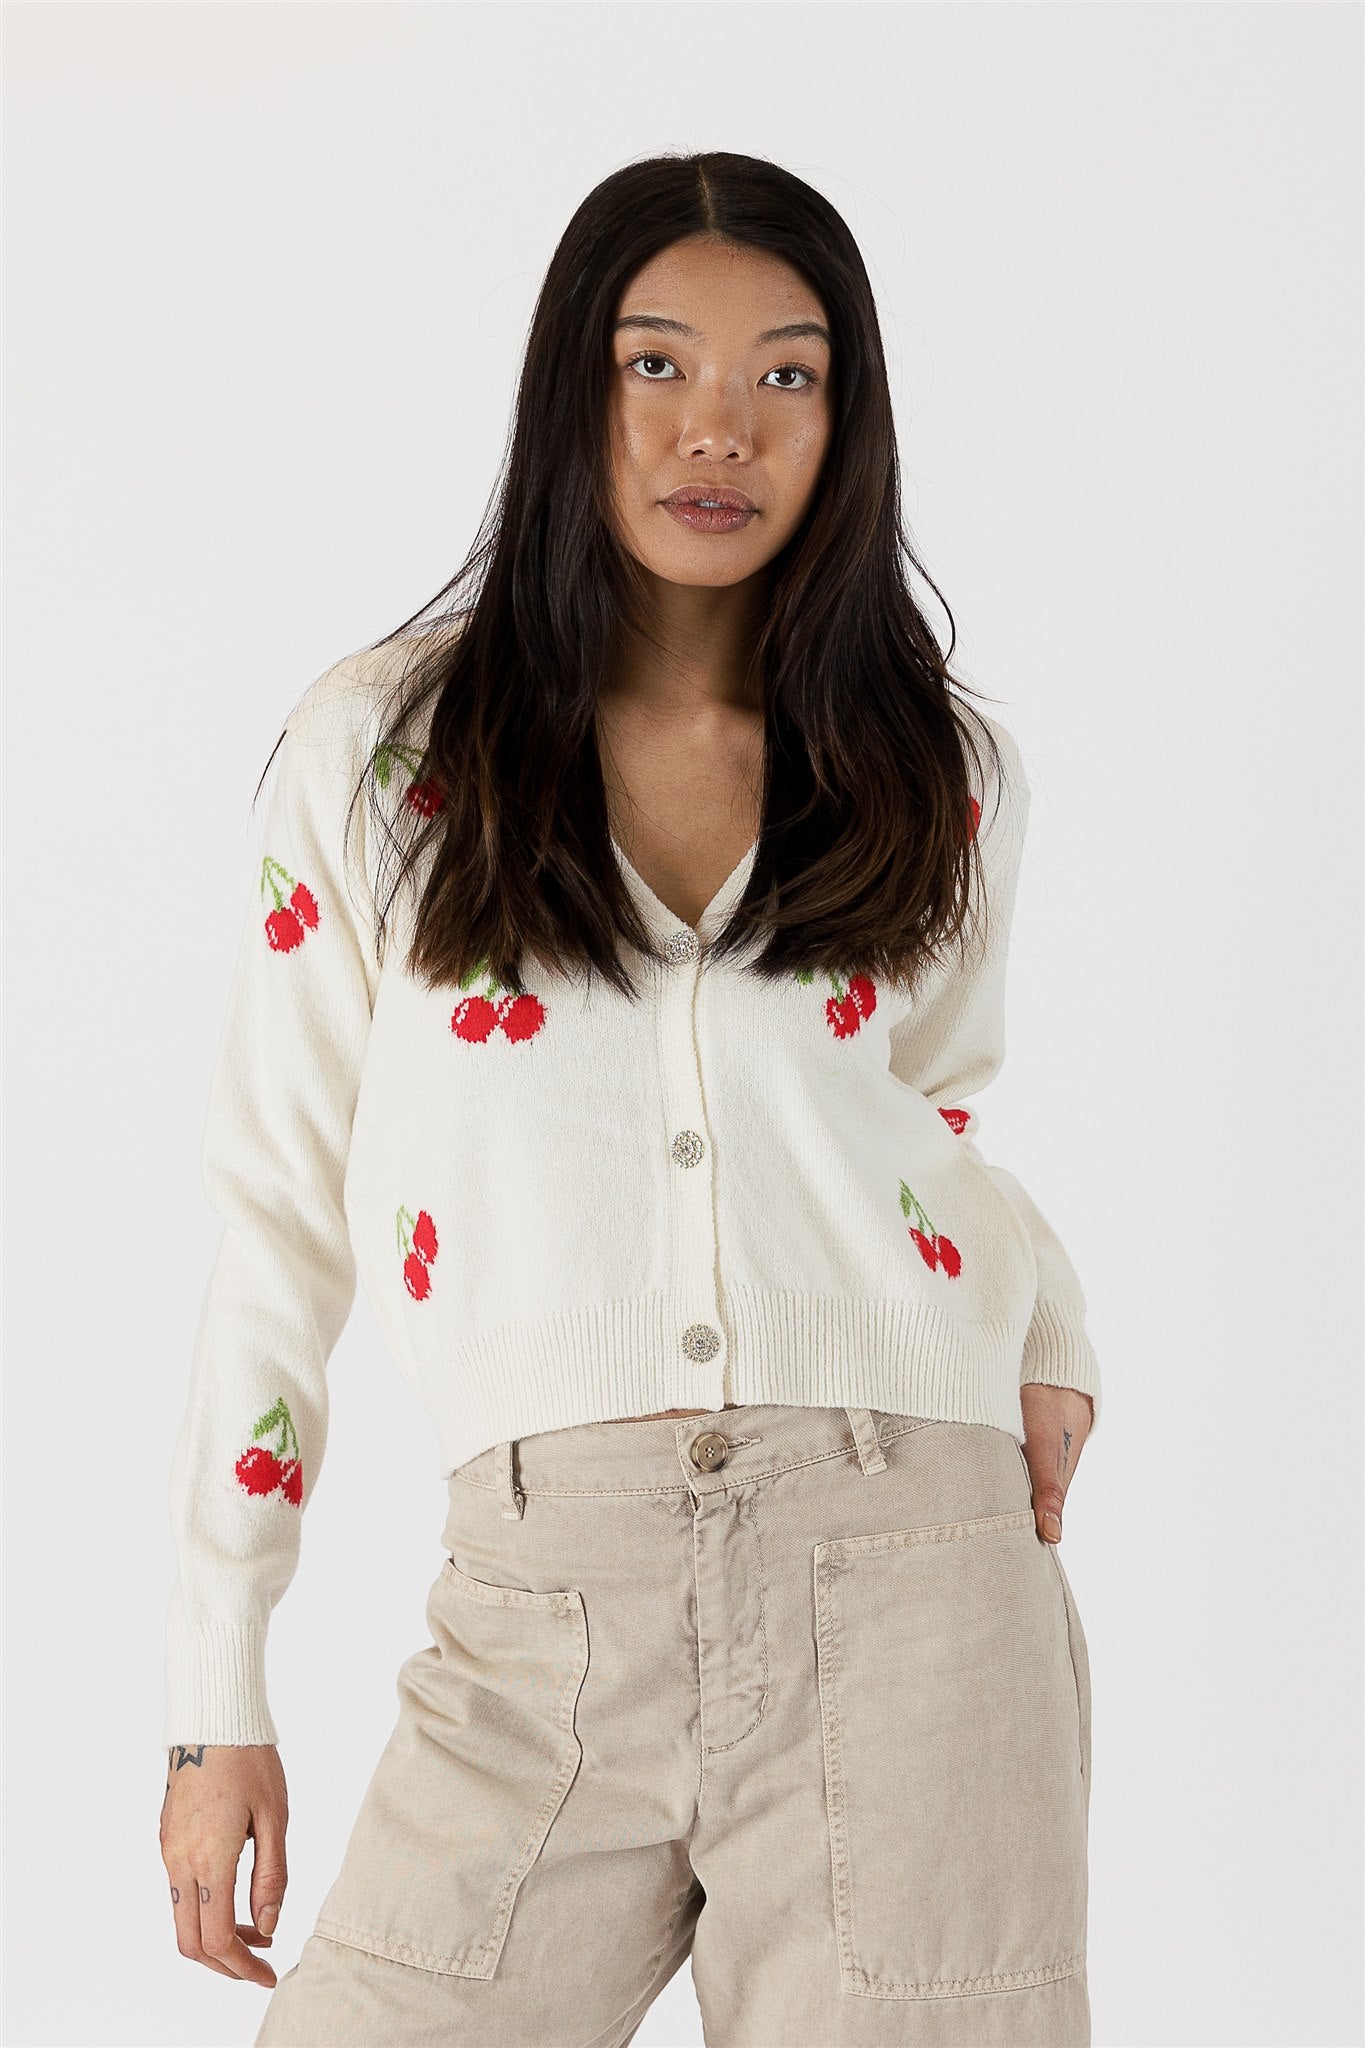 Lyla+Luxe Top - Cherry Print Cardigan - Off White